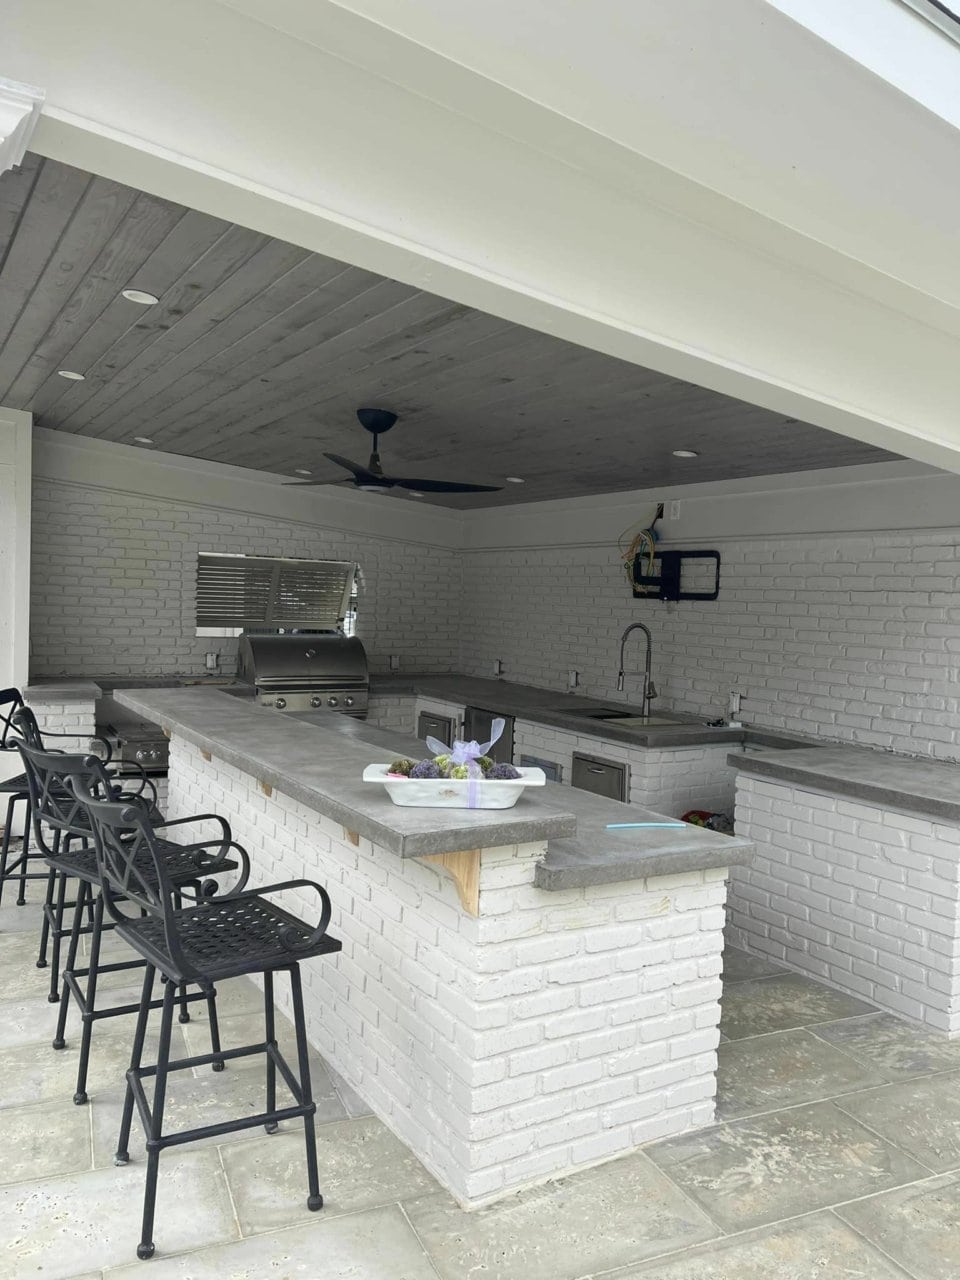 An outdoor kitchen with a bar and stools.